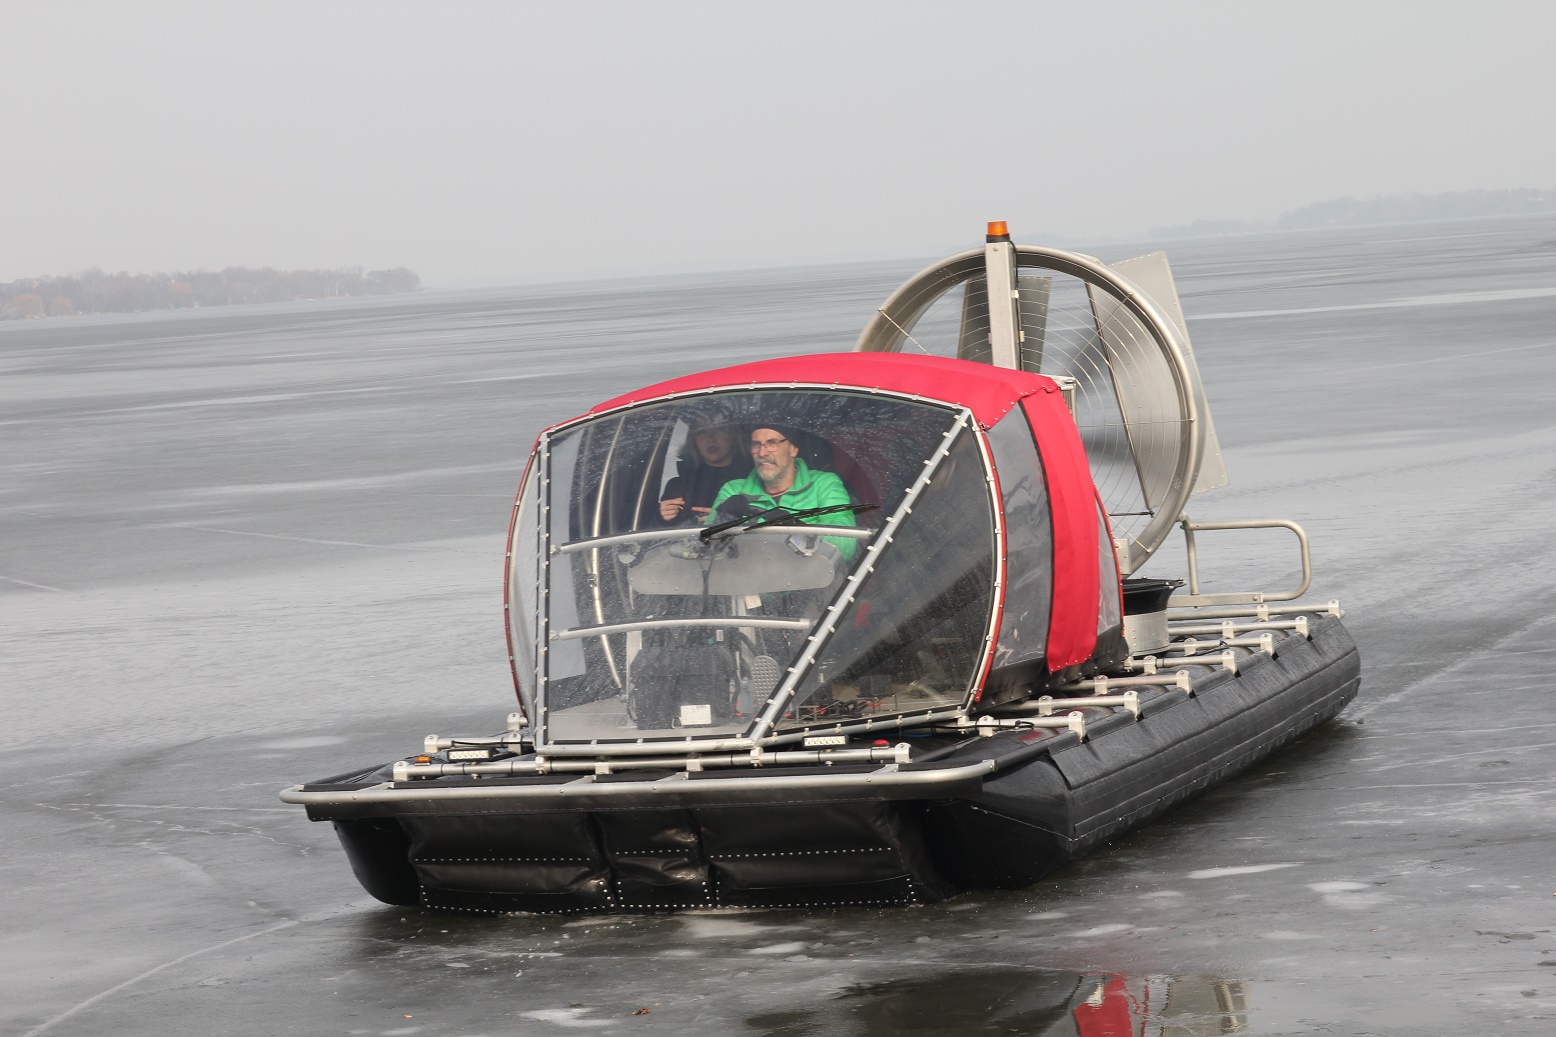 ATASD hovercraft airboat on thin ice